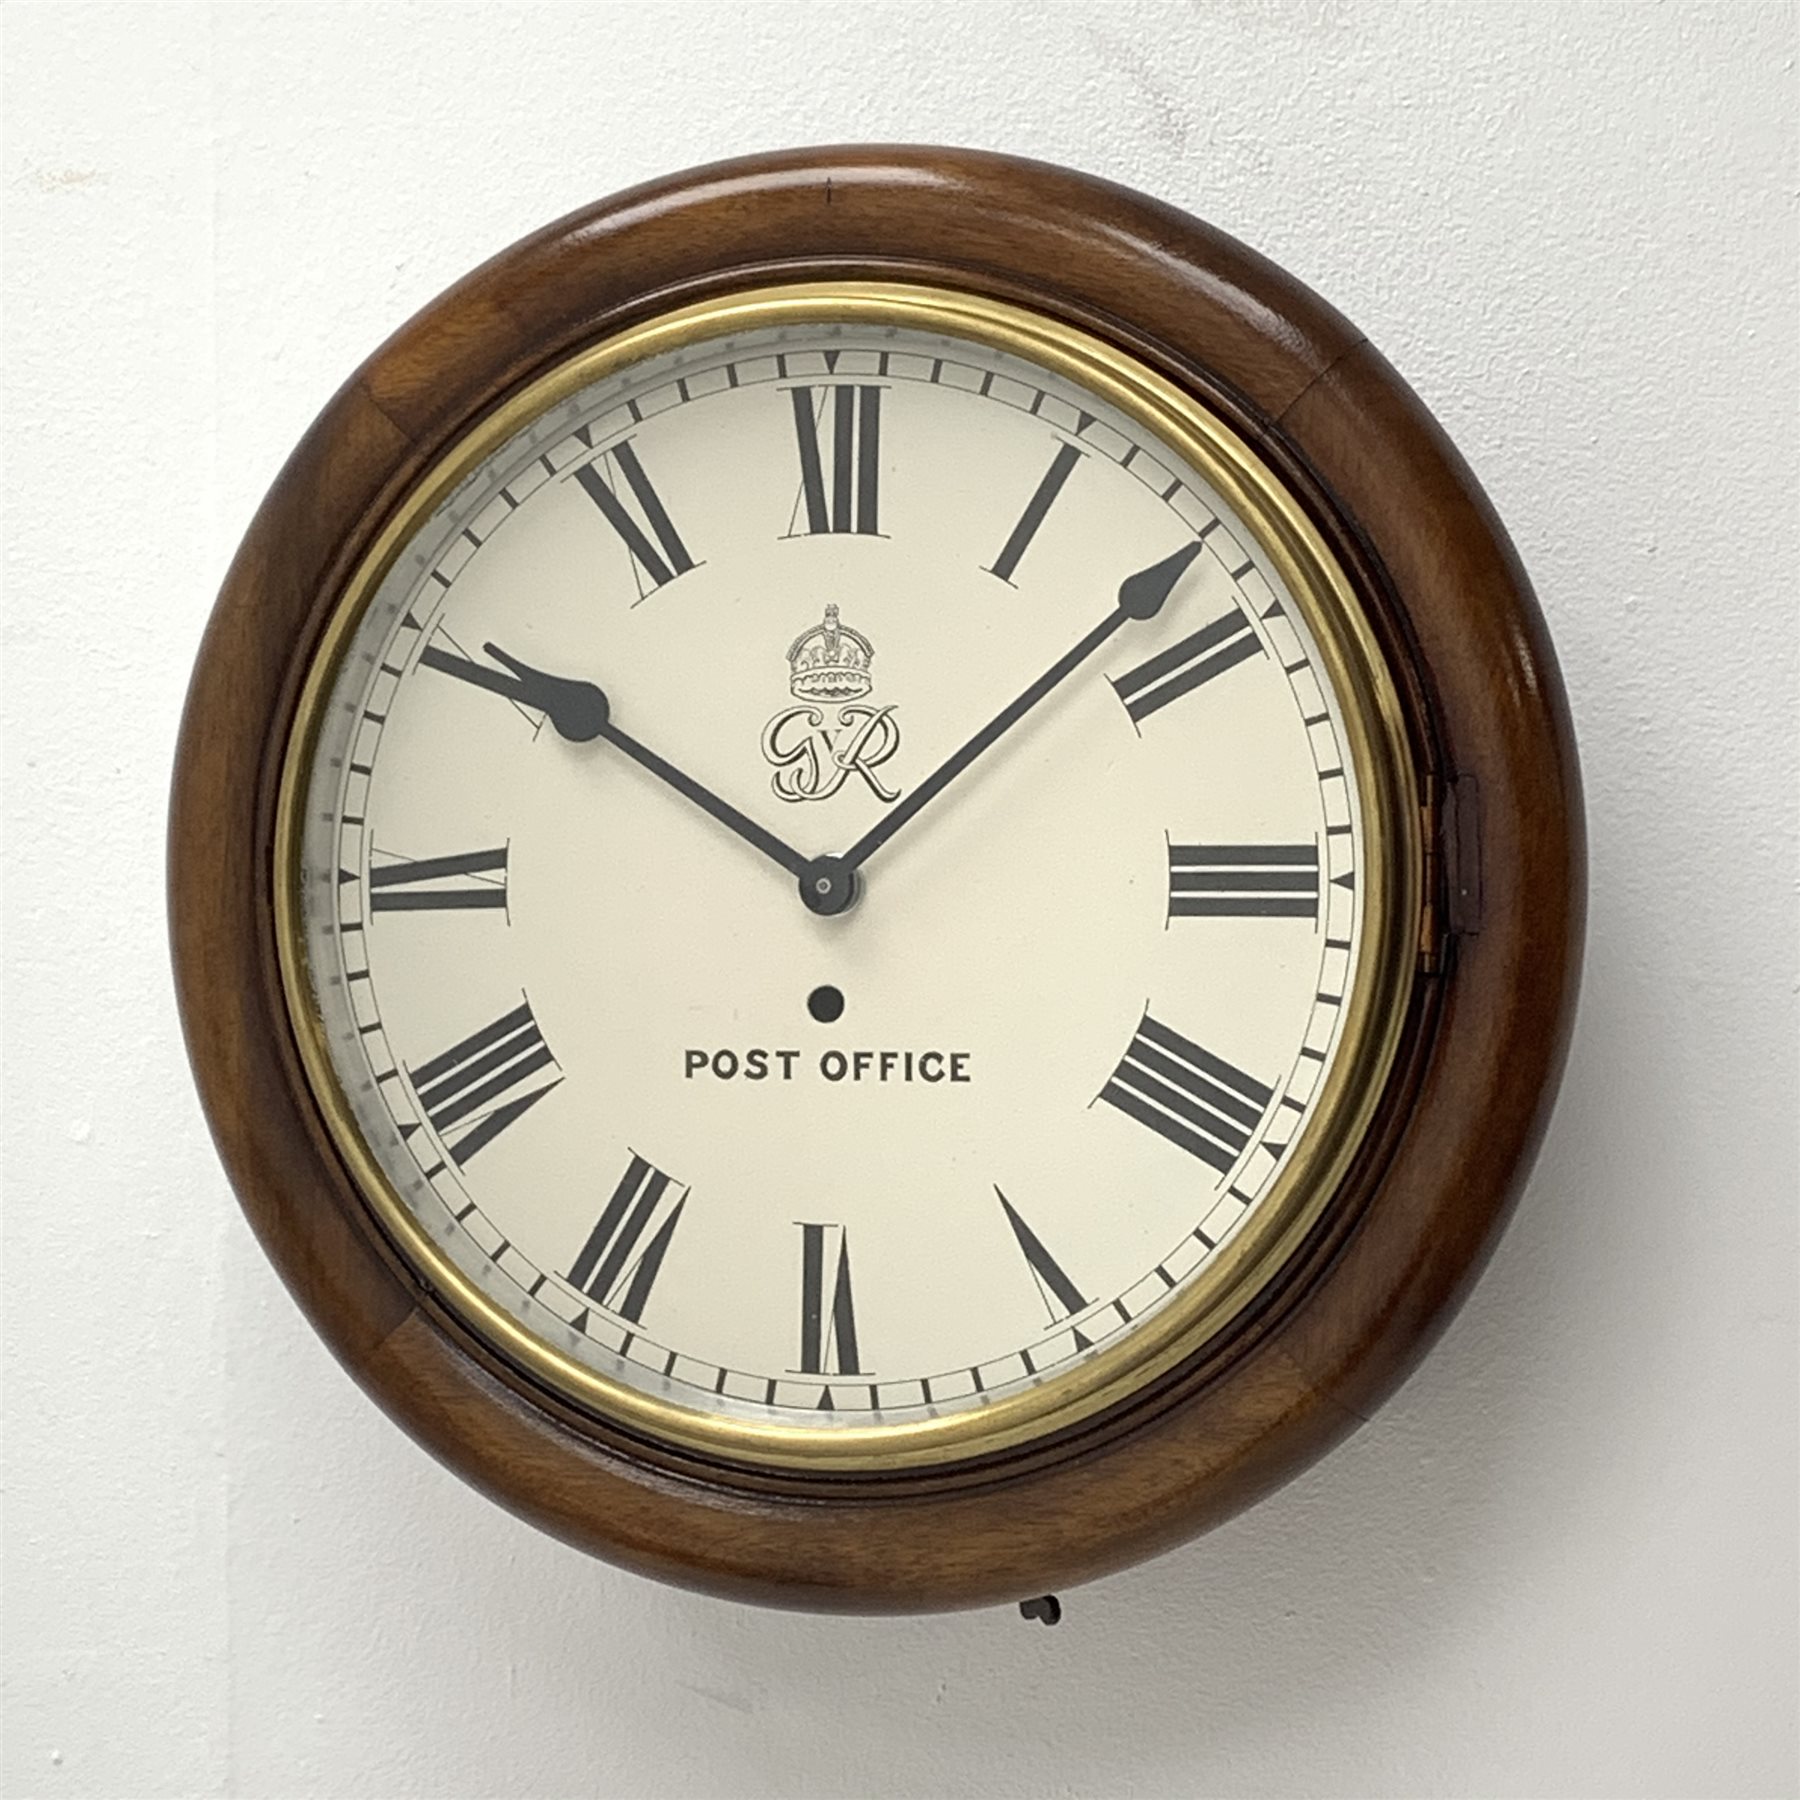 Early 20th century circular mahogany cased dial clock, the enamel Roman dial inscribed with the Geor - Image 2 of 4